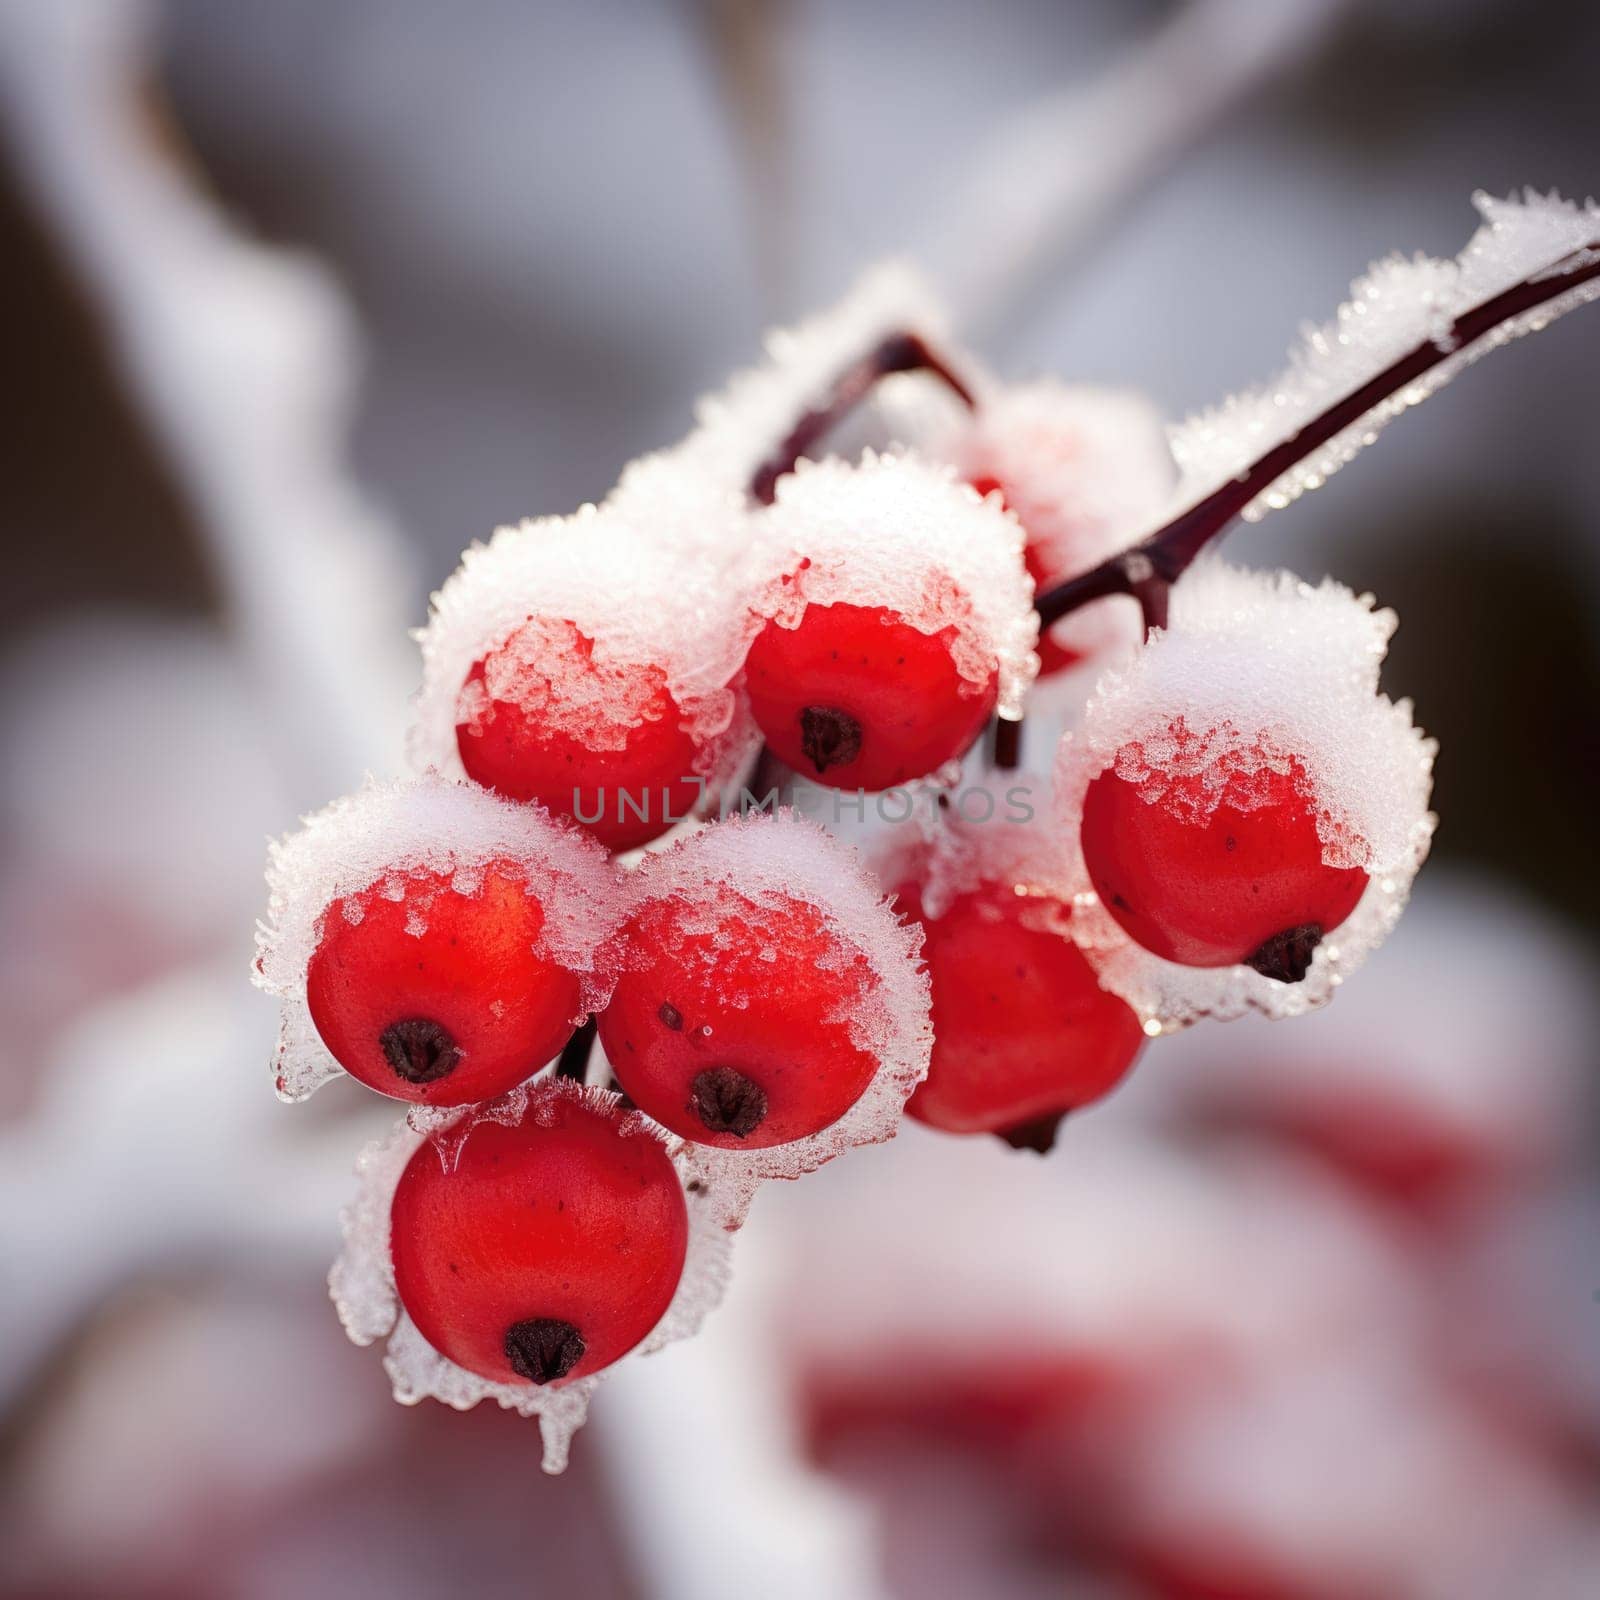 Red berries covered in snow on a branch